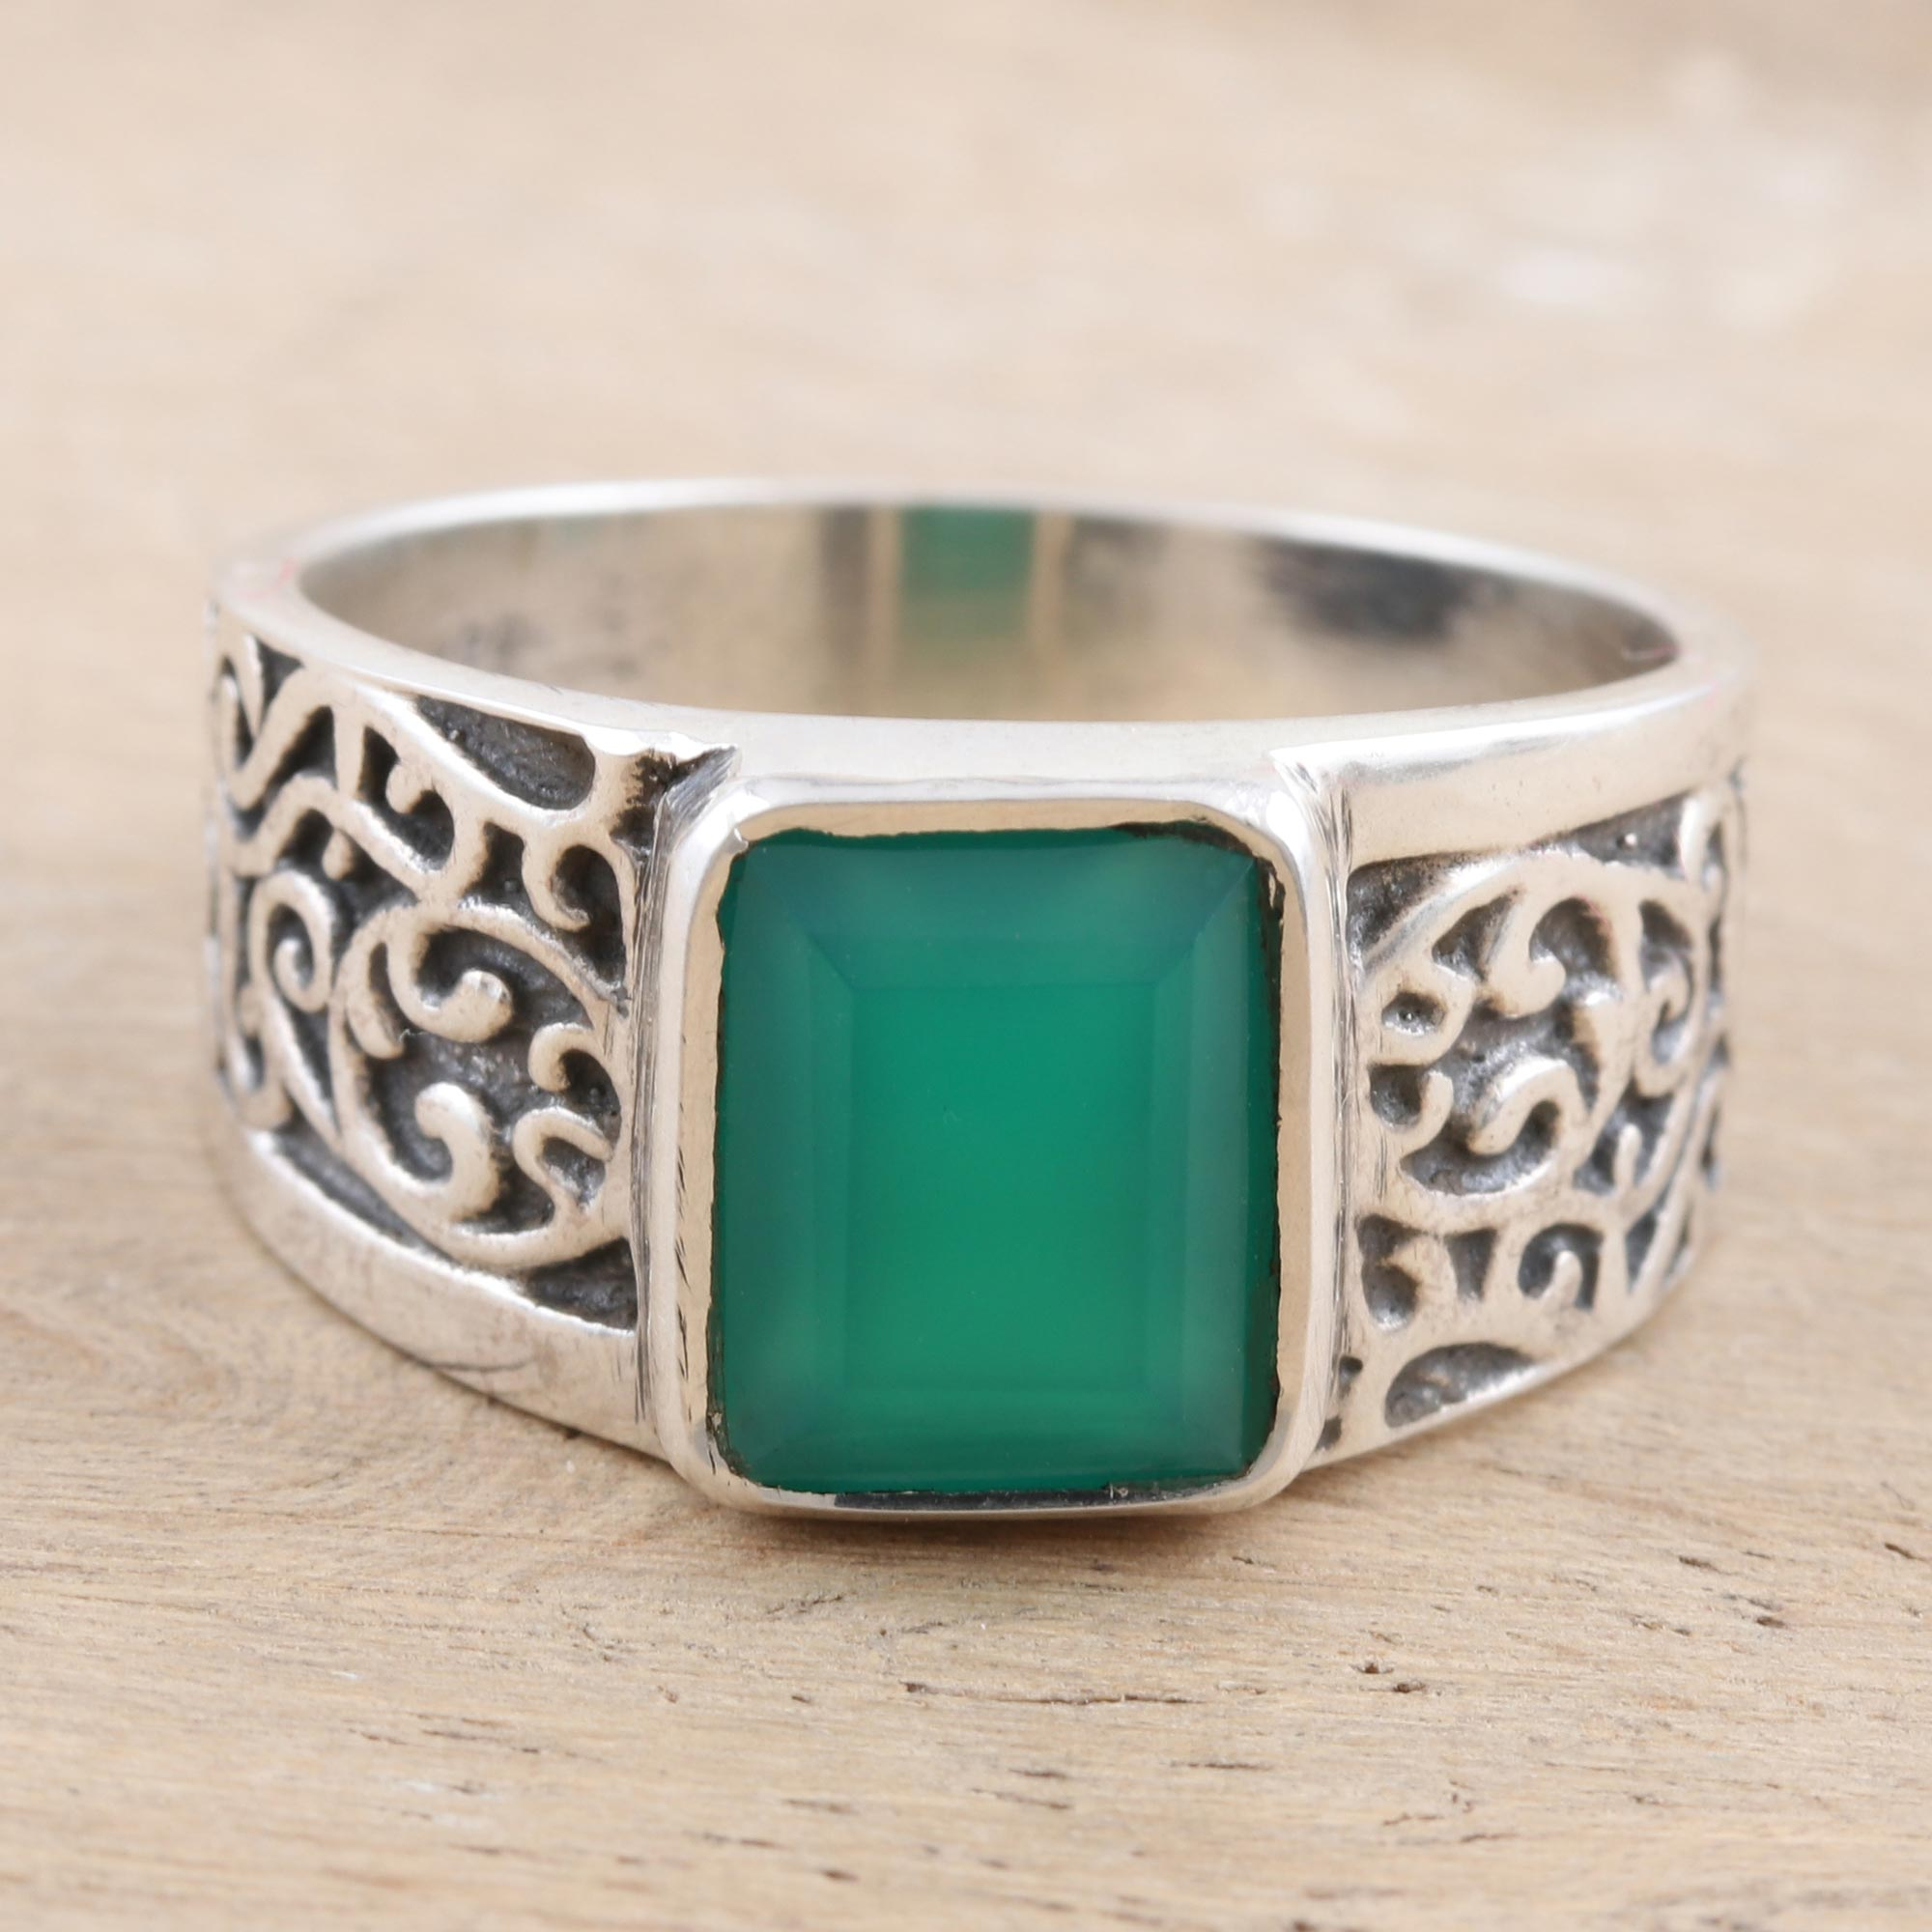 Men's Green Onyx and Sterling Silver Cocktail Ring, 'Green Glisten'